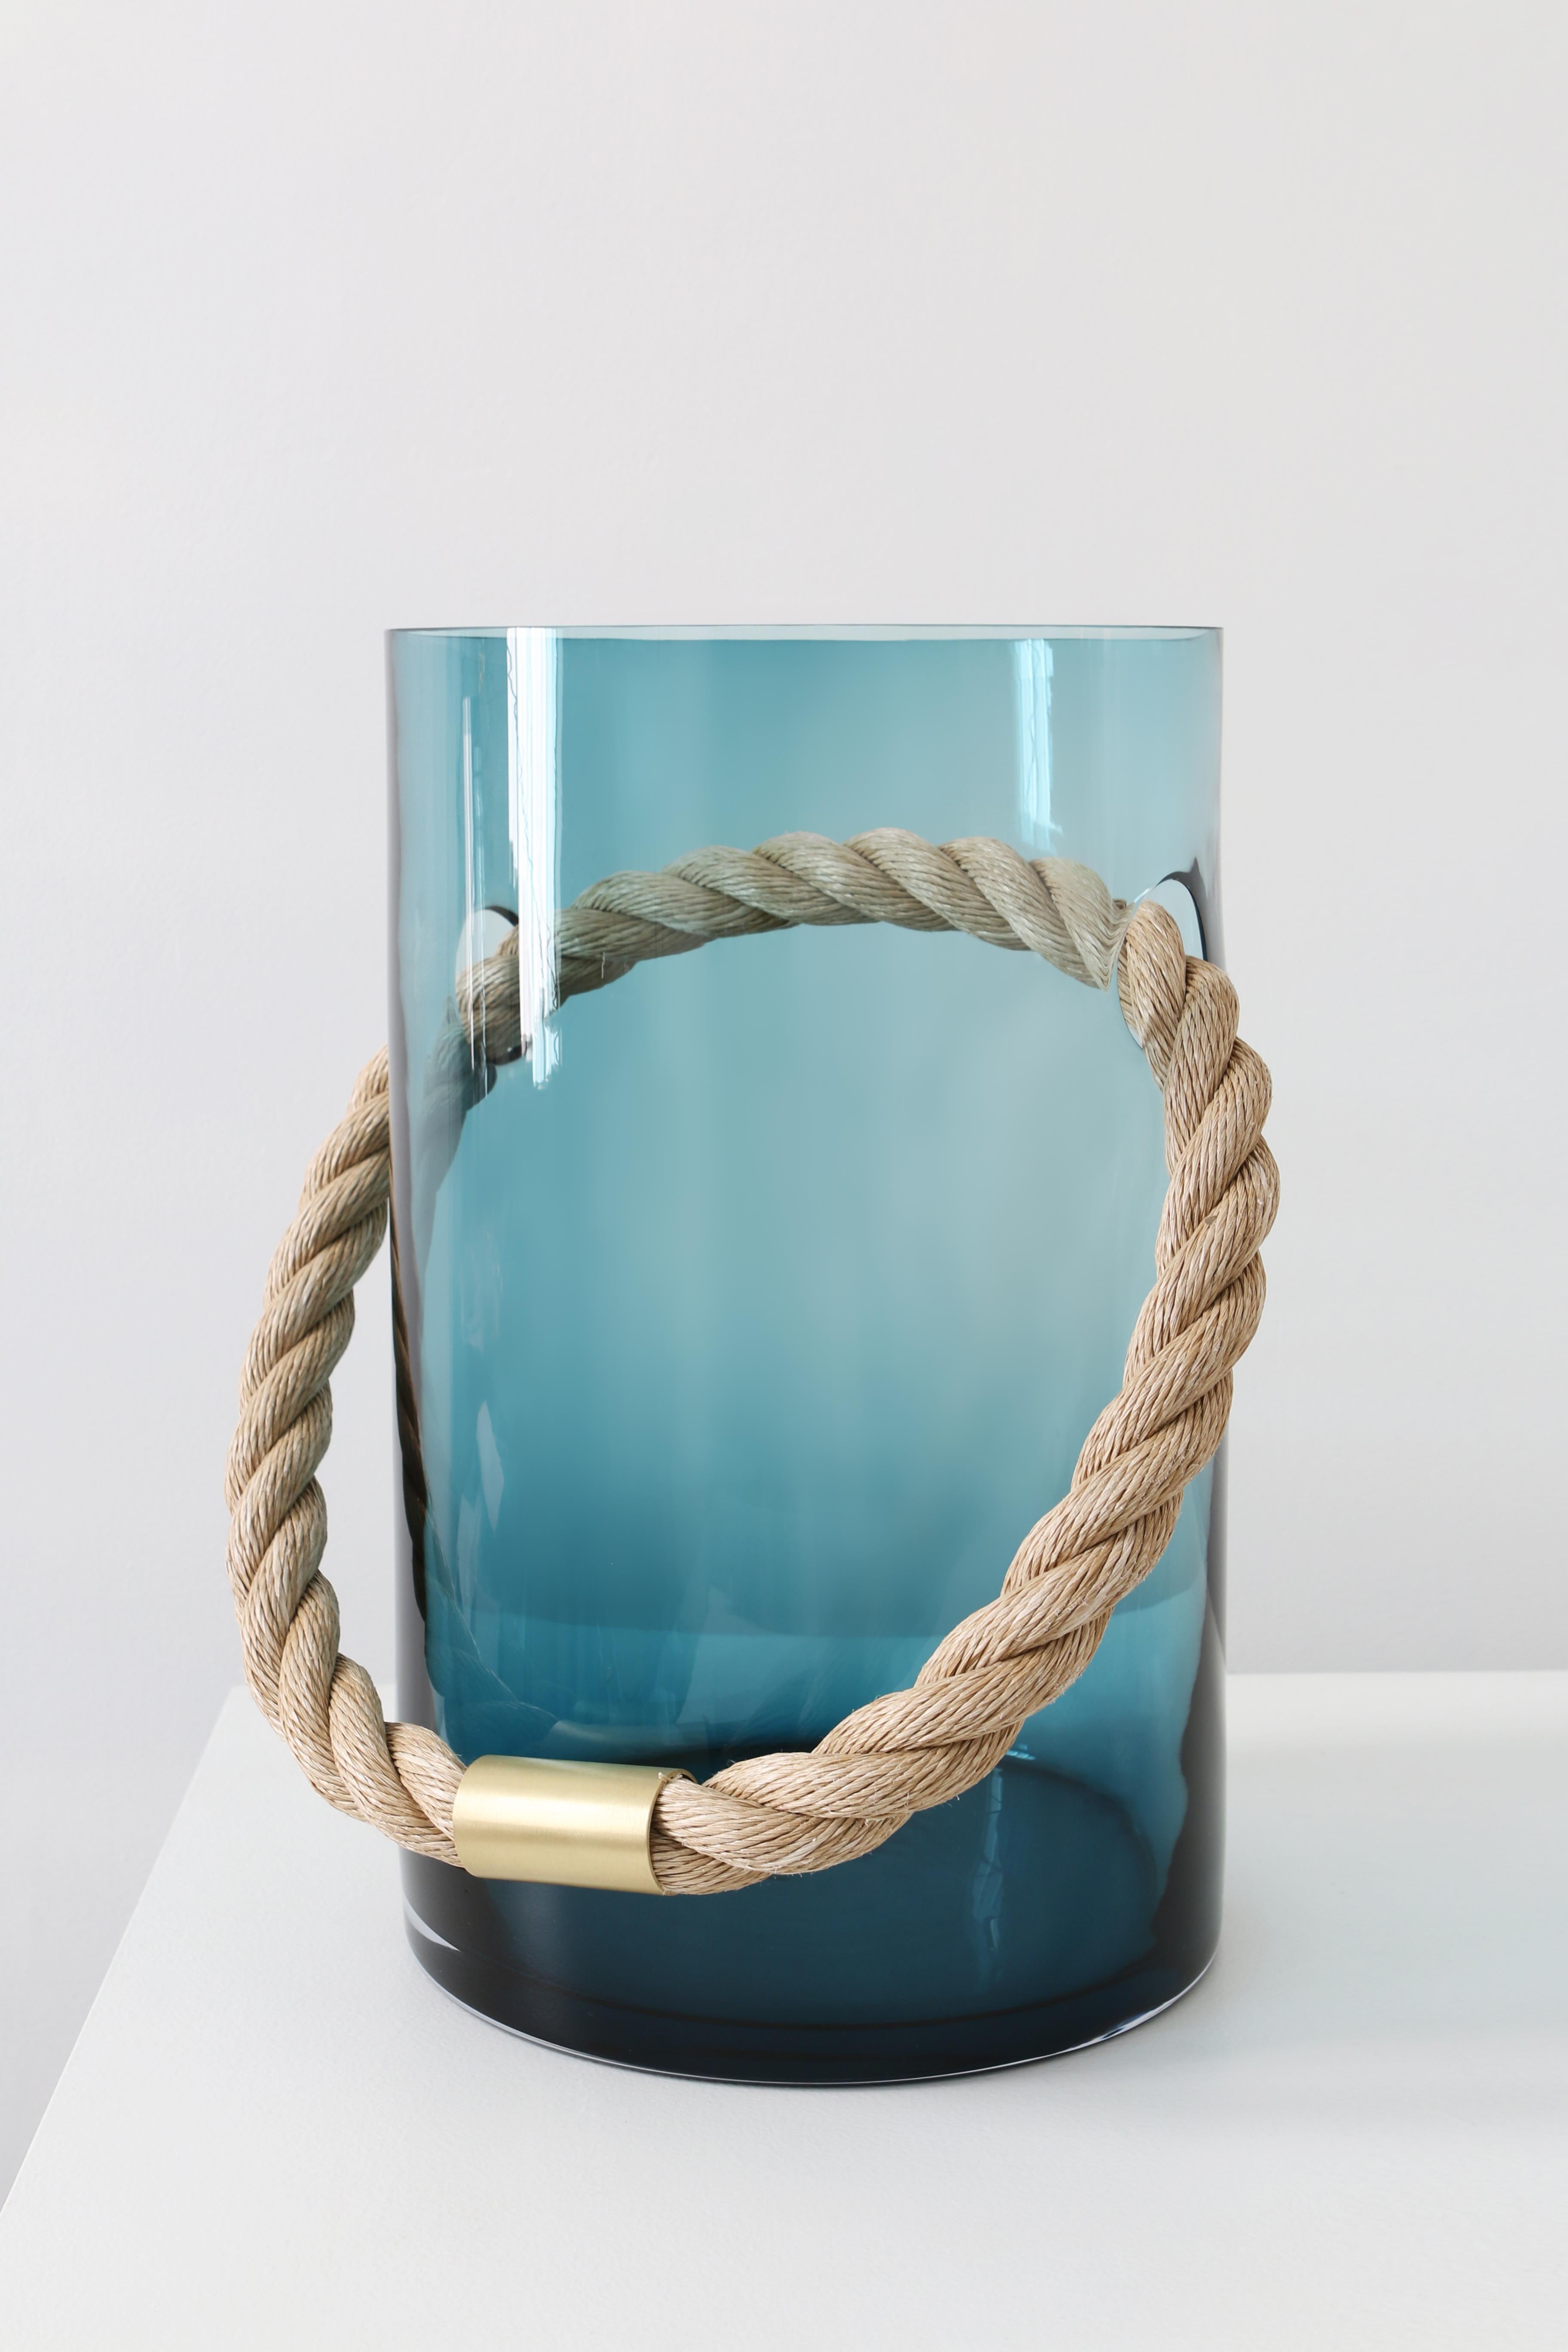 Green rope vessel by SkLO
Dimensions: D 29 x H 50 cm
Materials: Glass, brass
Available in clear, pine tree green and smokey brown.
Available in 4 metal finishes: dark oxidized, polished nickel, brushed nickel, brushed brass.

Oversized